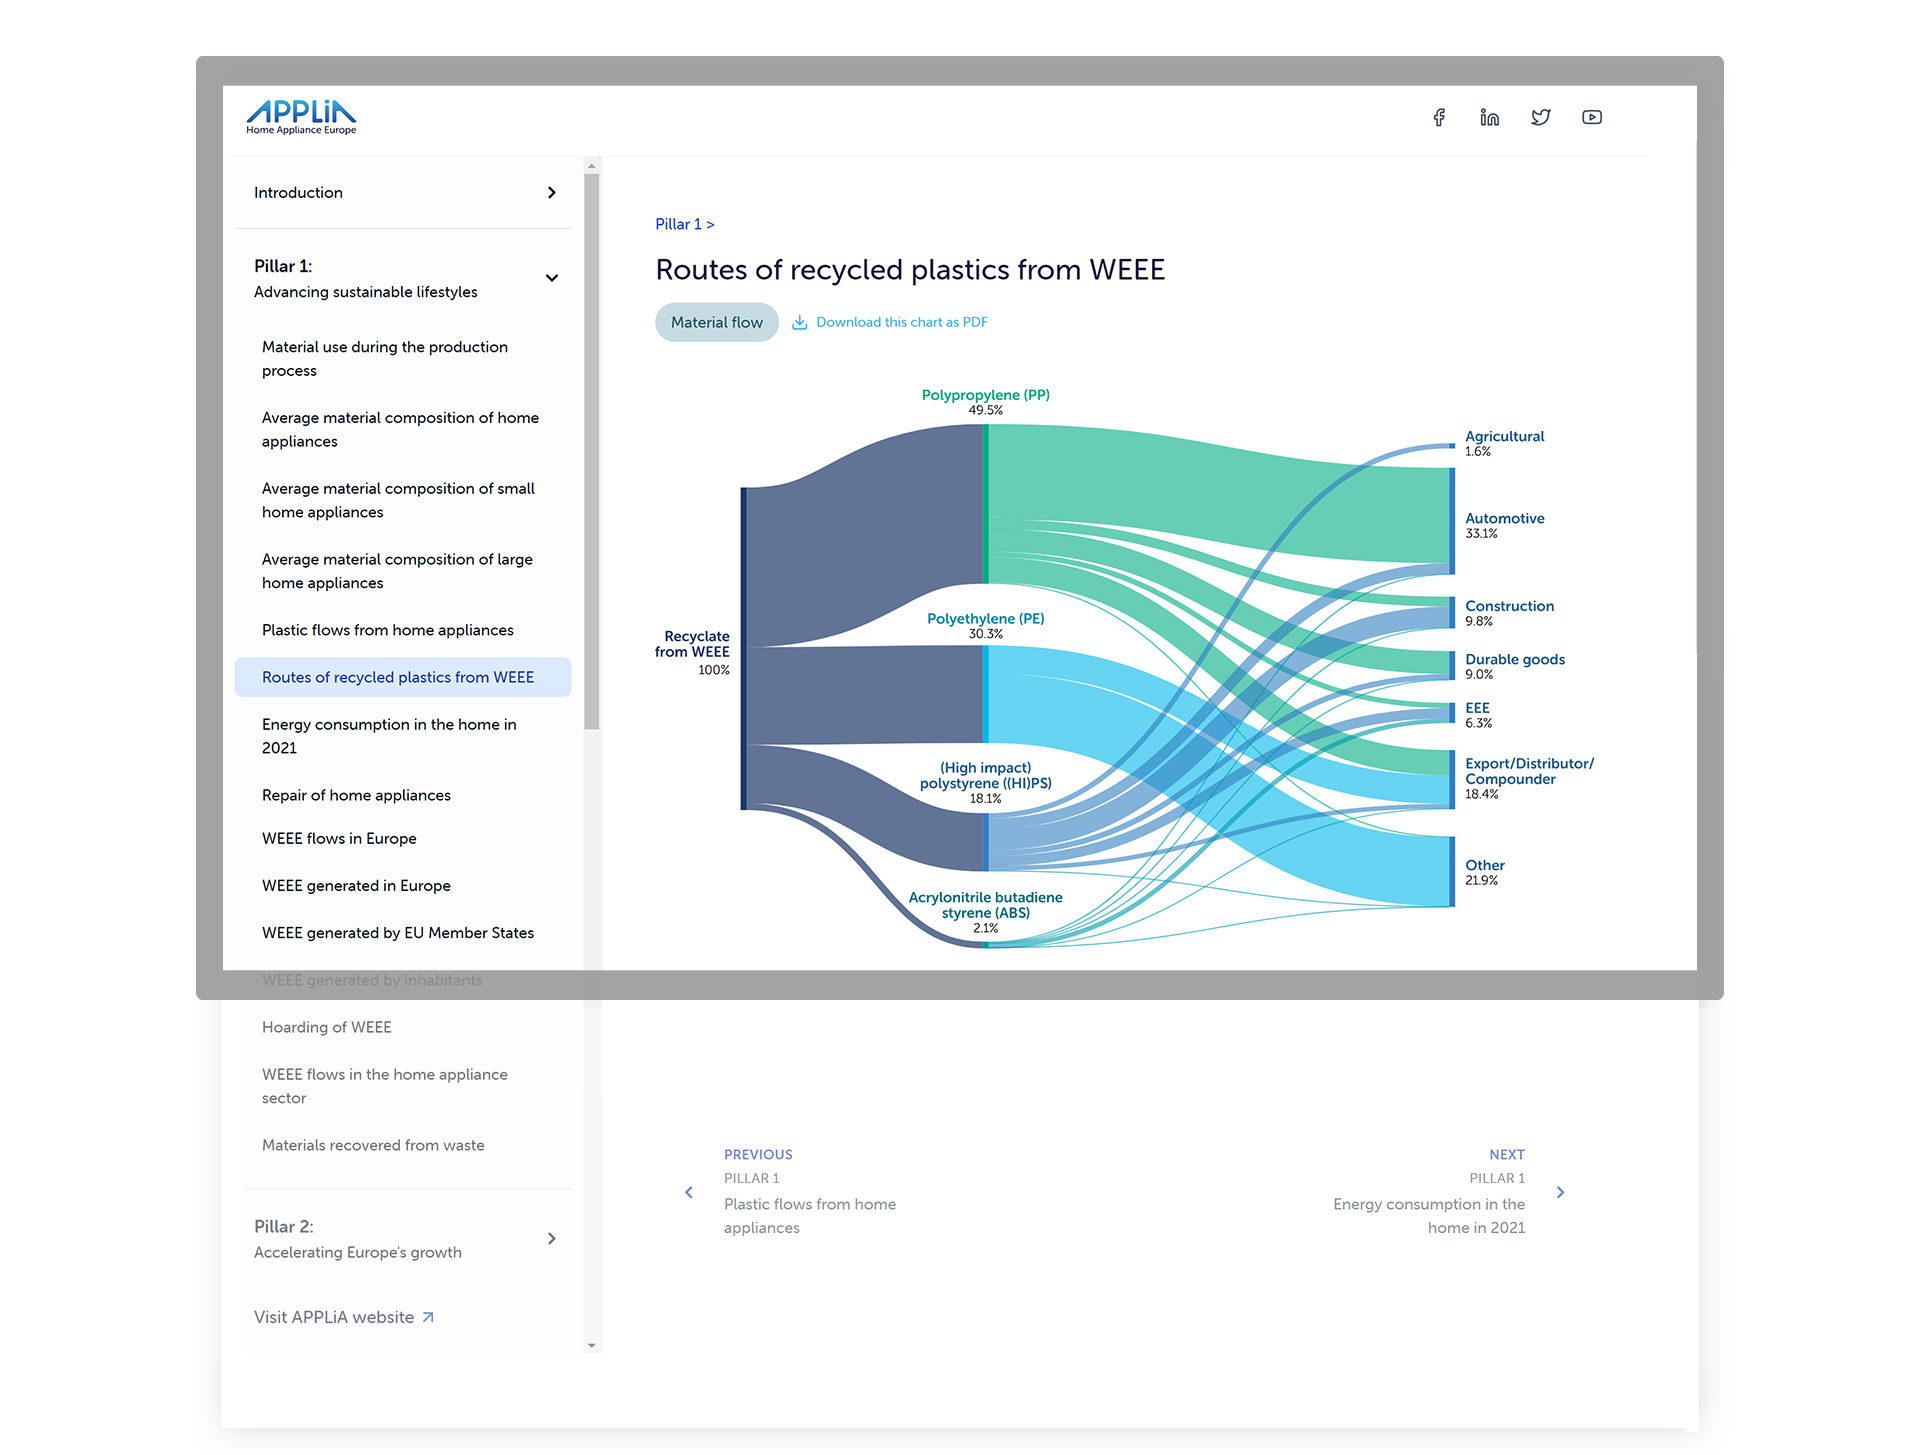 The APPLiA statistical report has a web version where you can easily browse through all the stories and visuals.